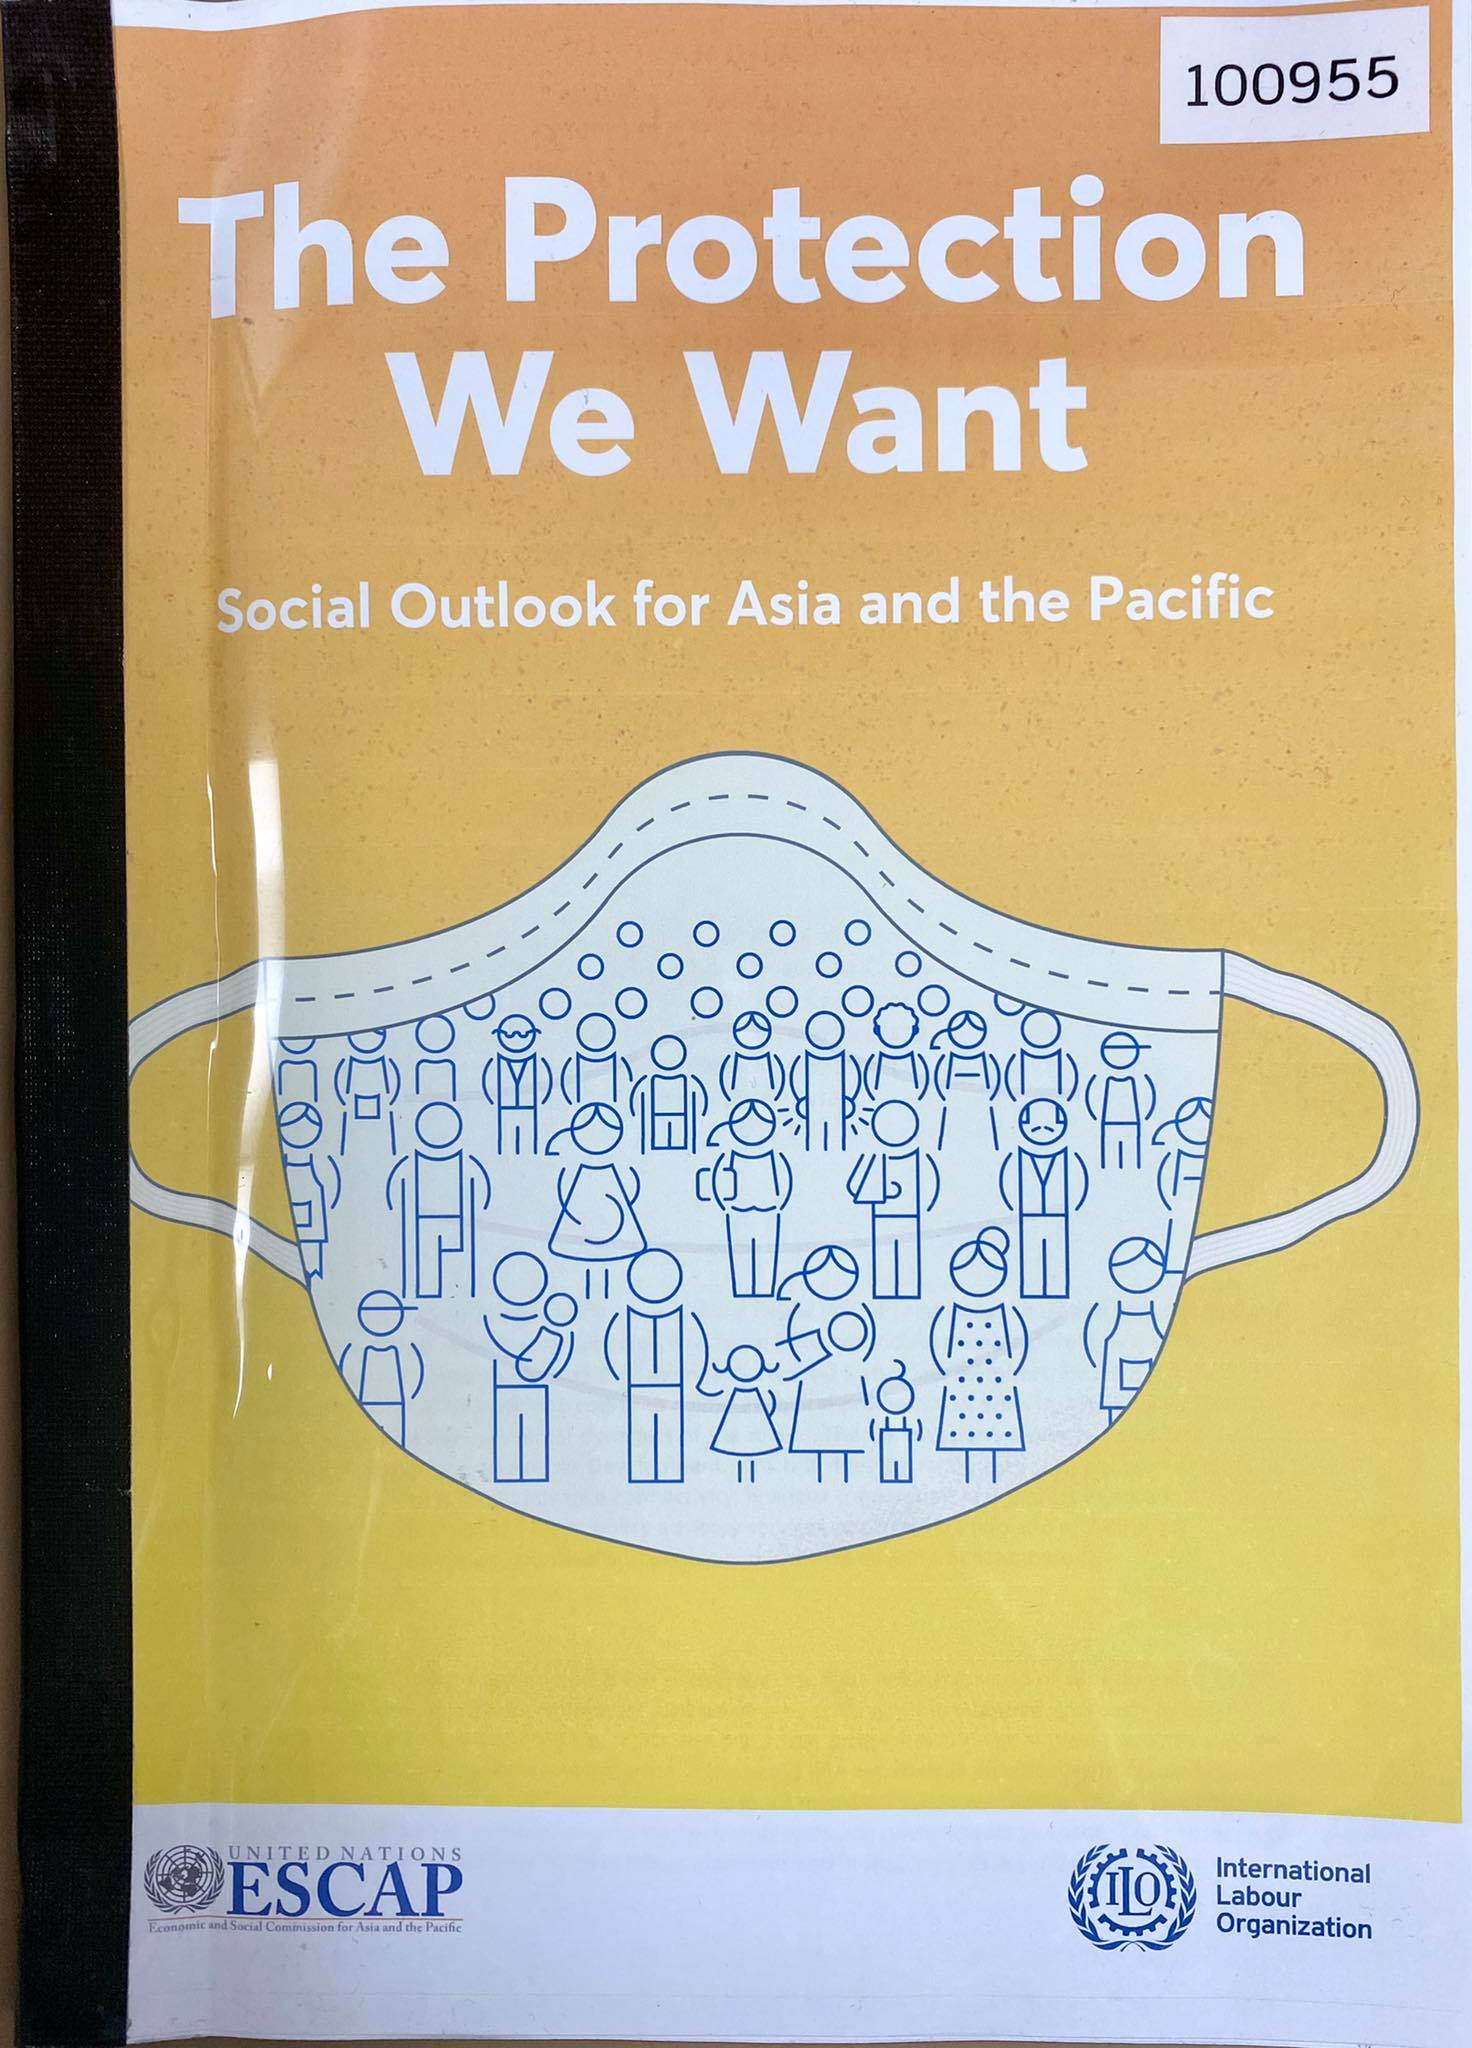 The Protection We Want: Social Outlook for Asia and the Pacific